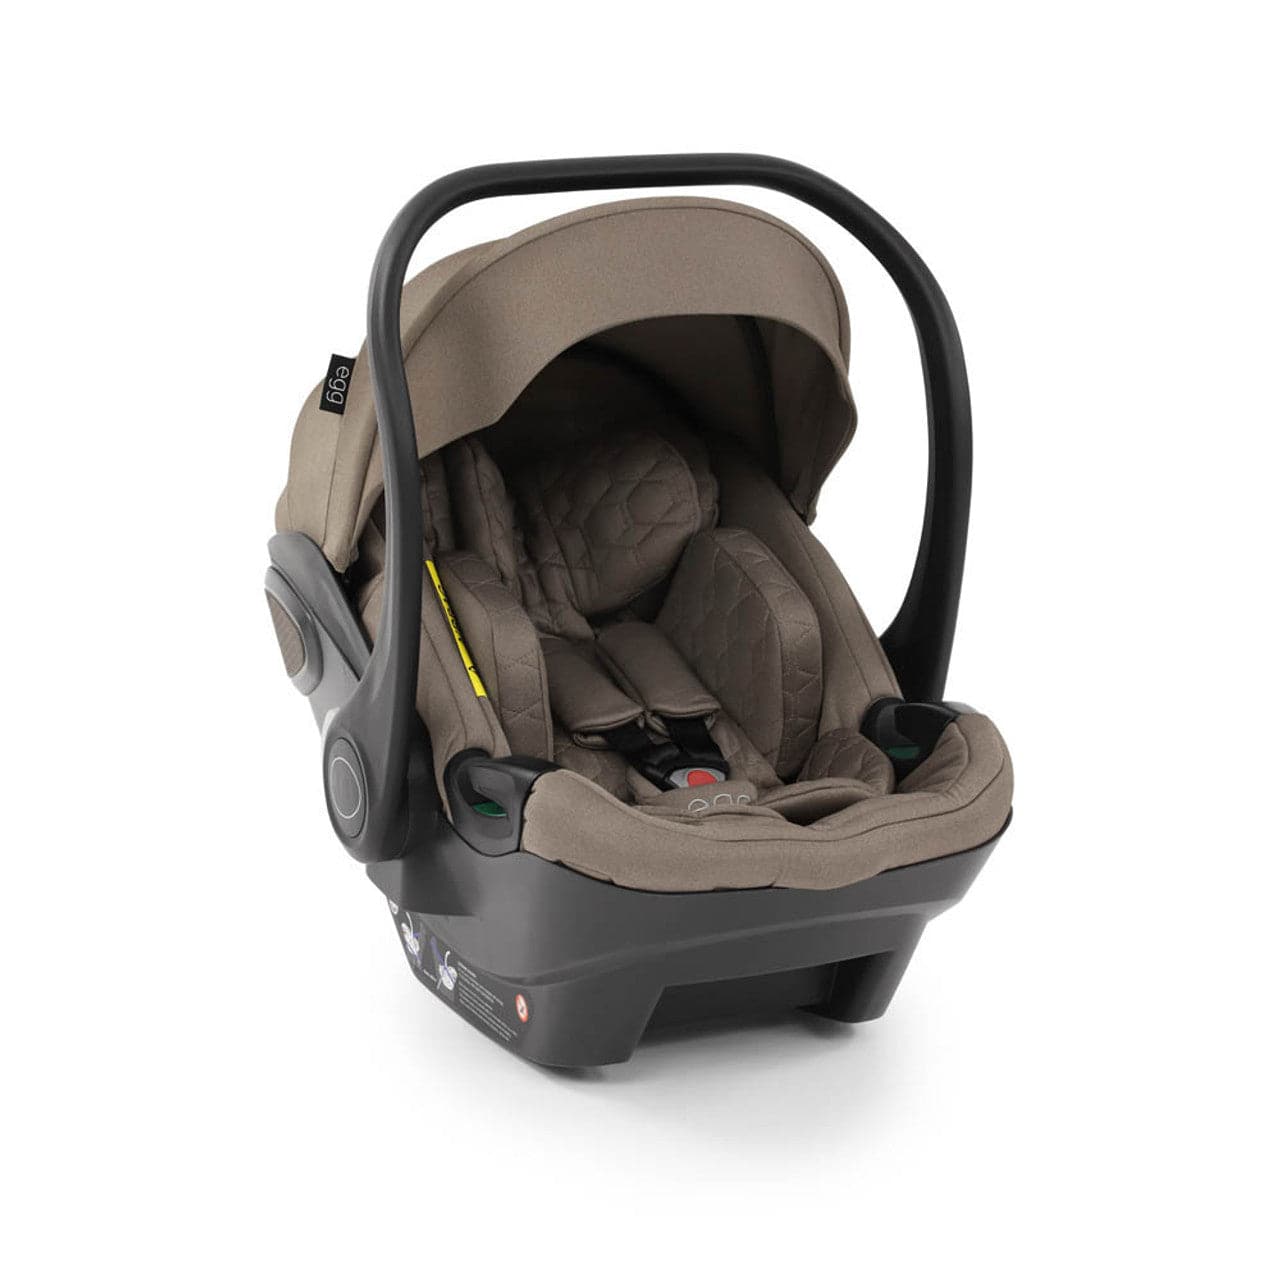 Egg® Shell i-Size Newborn Car Seat - Mink - For Your Little One